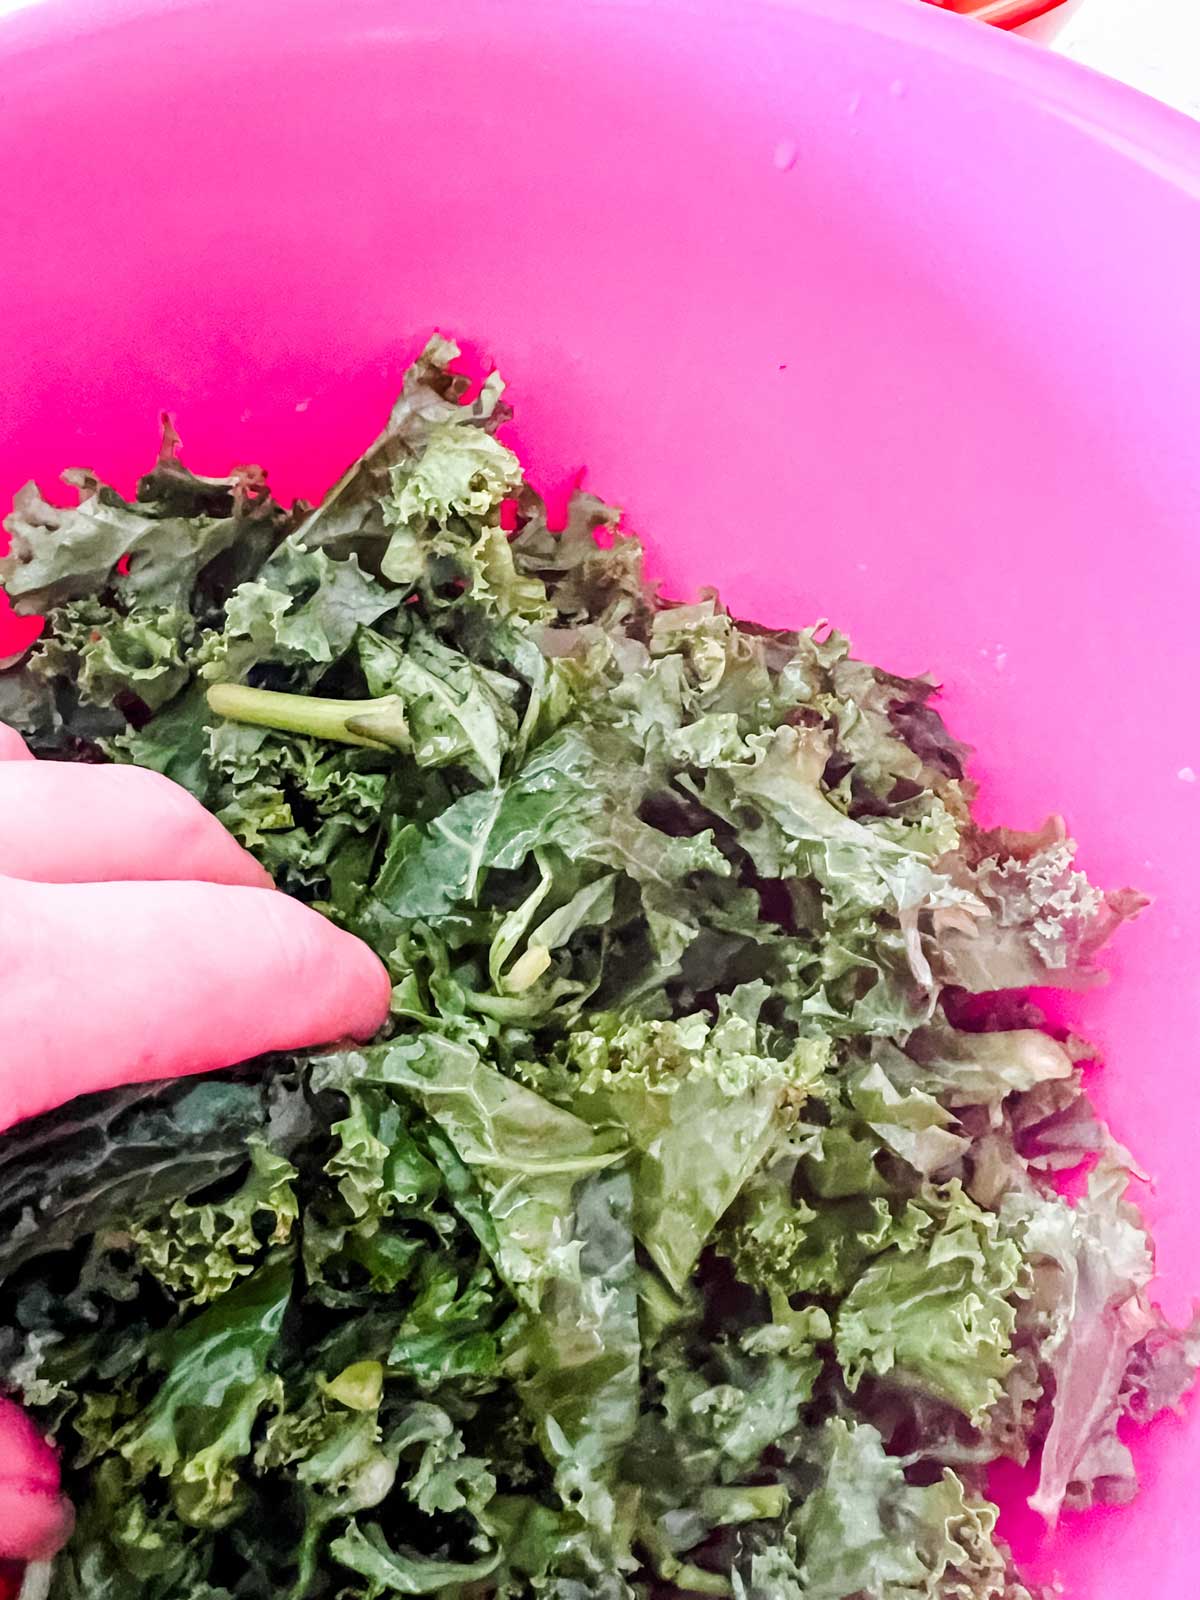 Overhead photo of kale being massaged in a pink bowl.